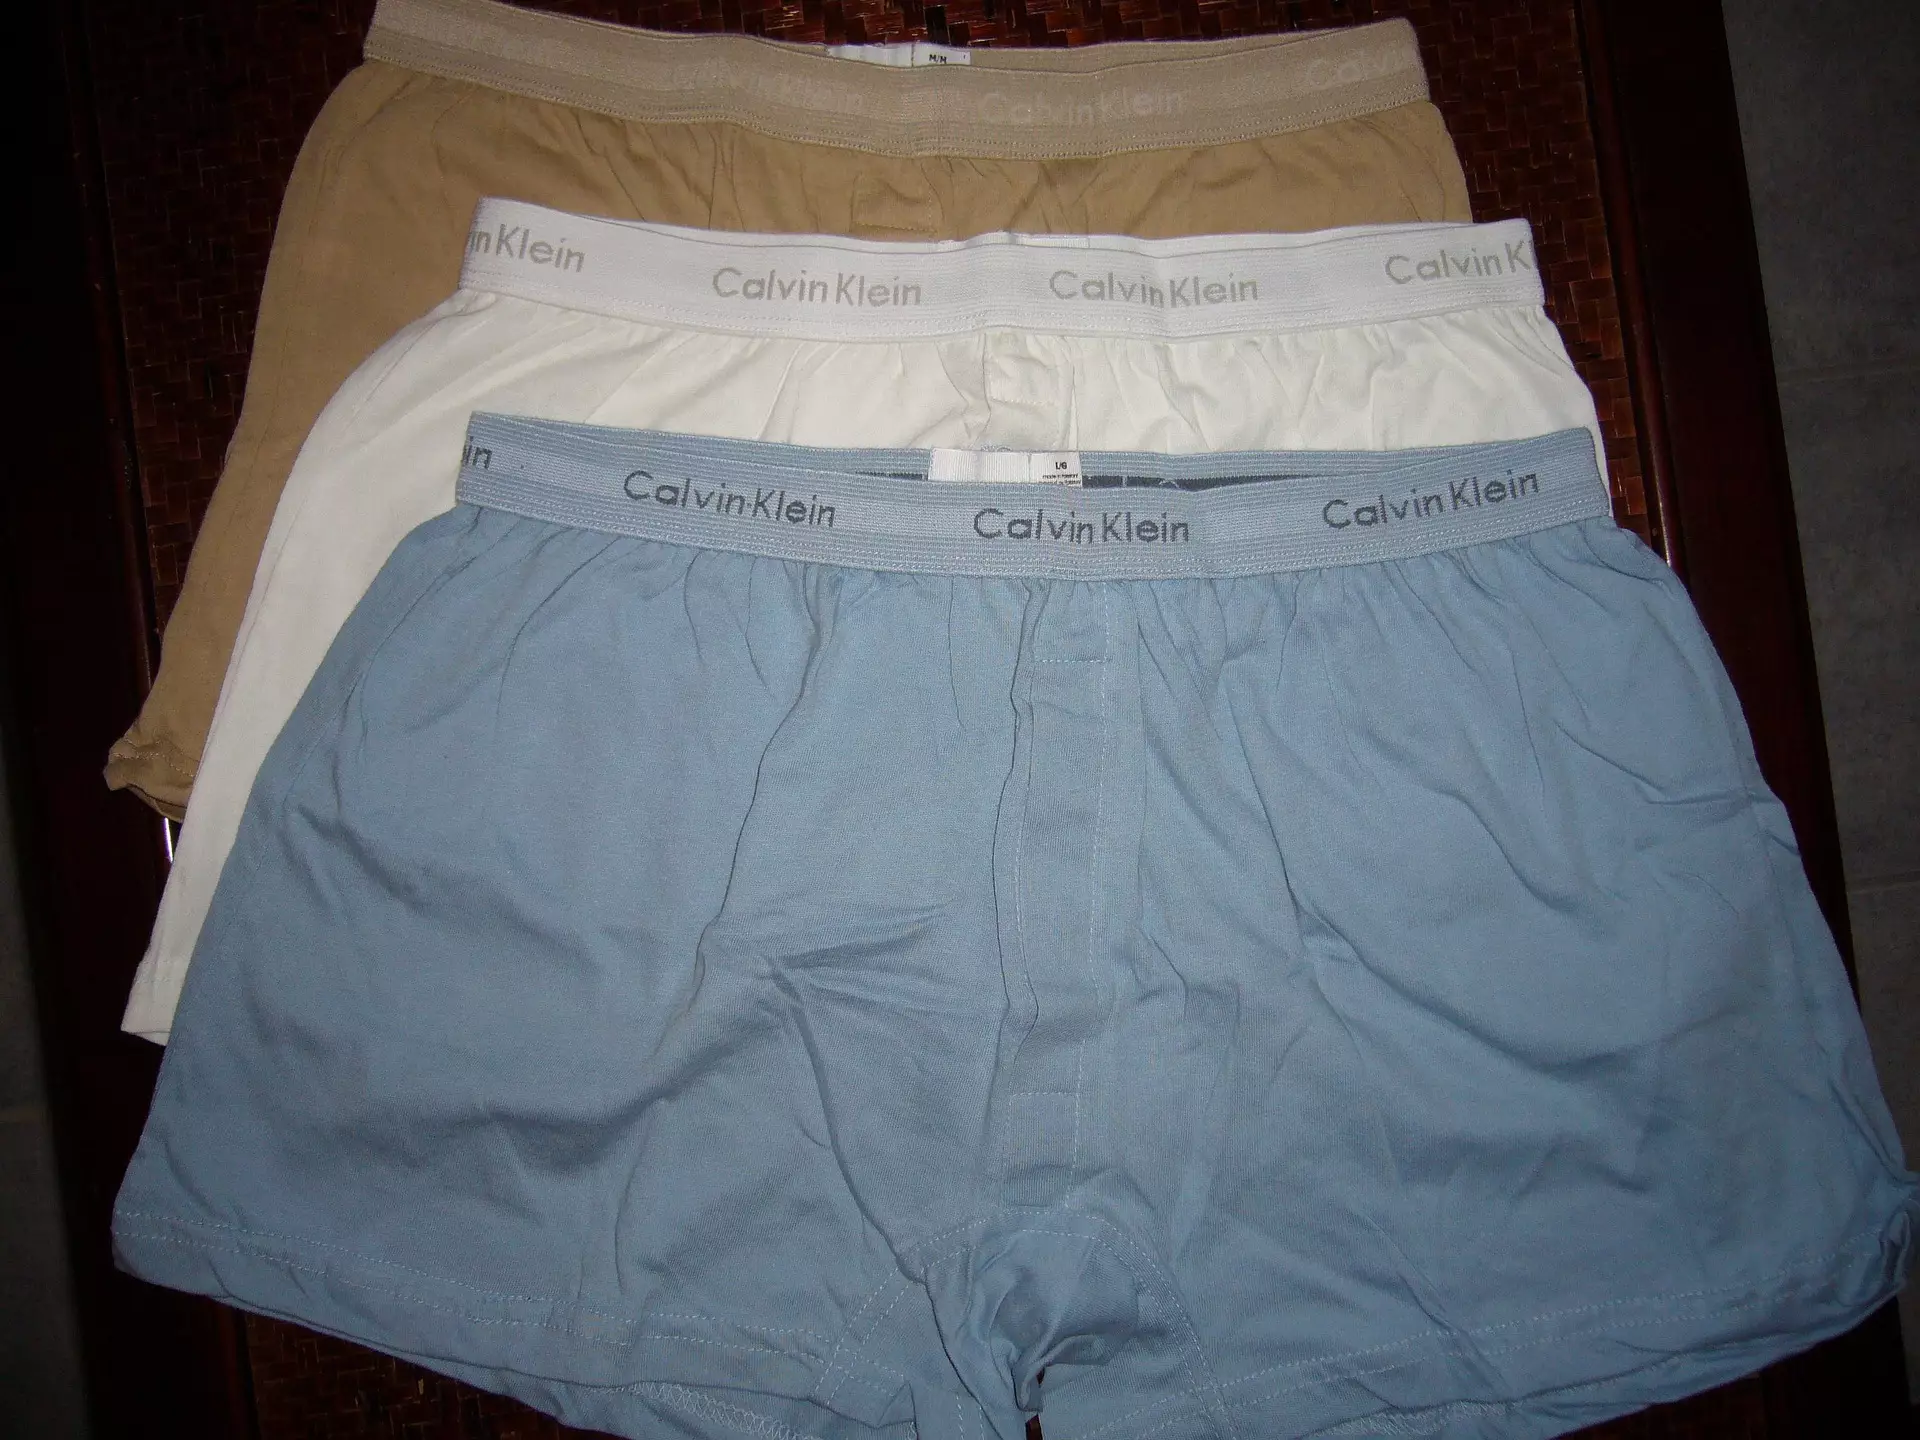 Is it weird that my guy best friend wants me to wear his boxers? What does  it mean? - Quora